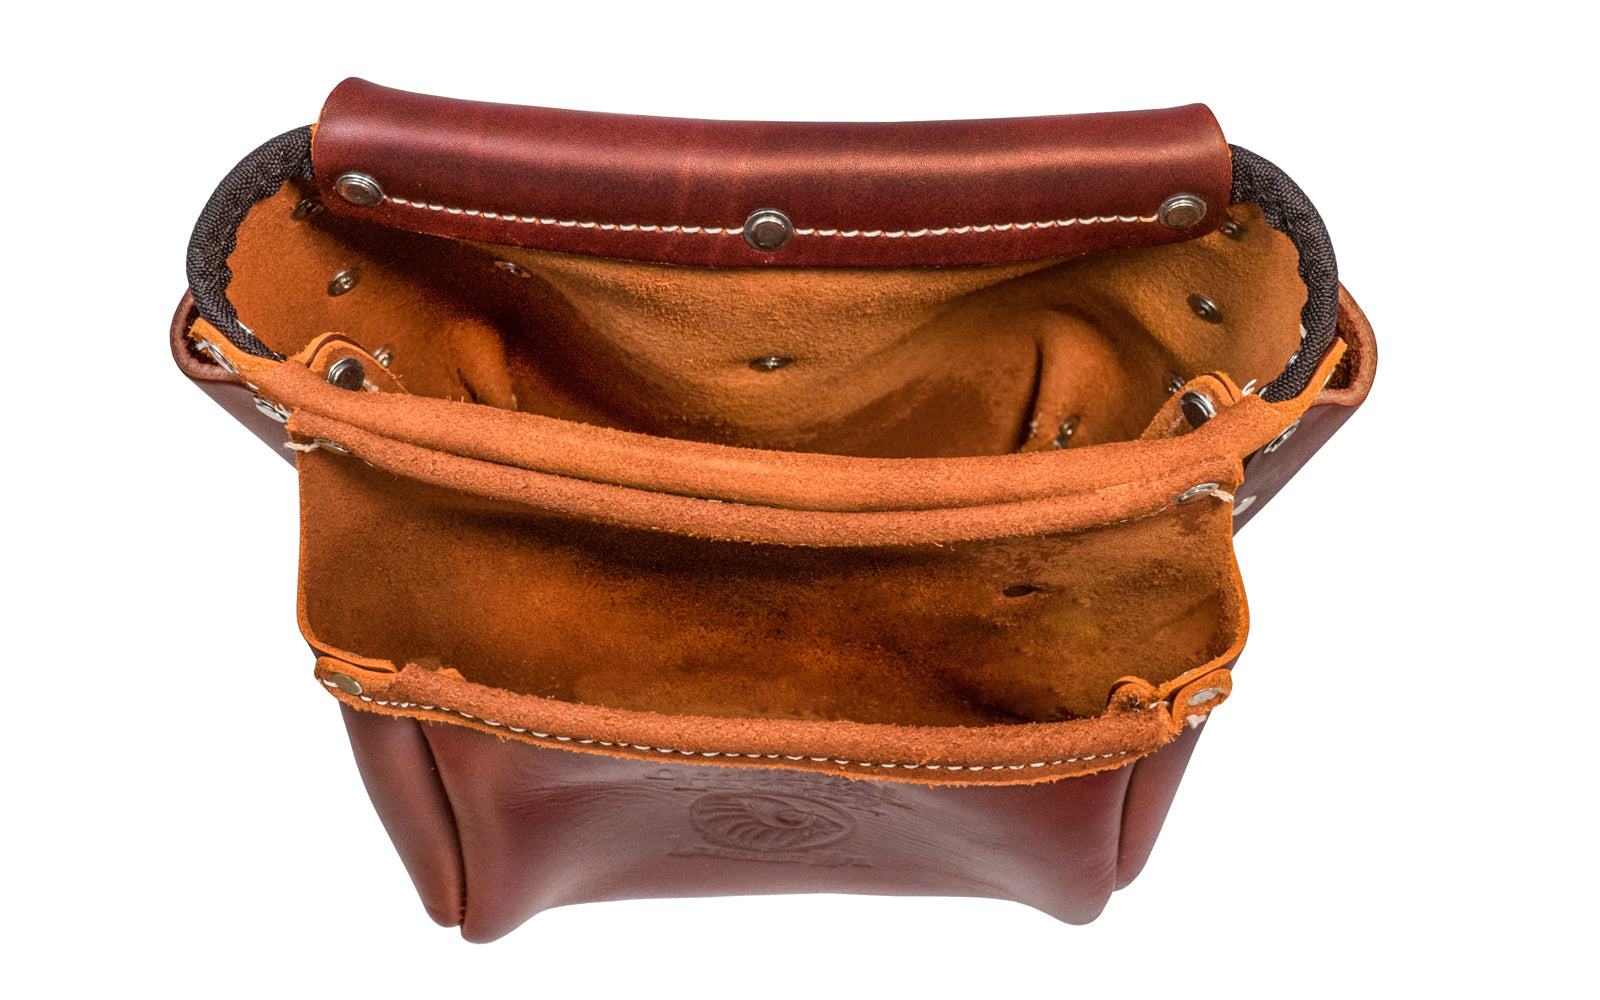 Occidental Leather Iron Worker's Leather Bolt Bag with Outer Bag